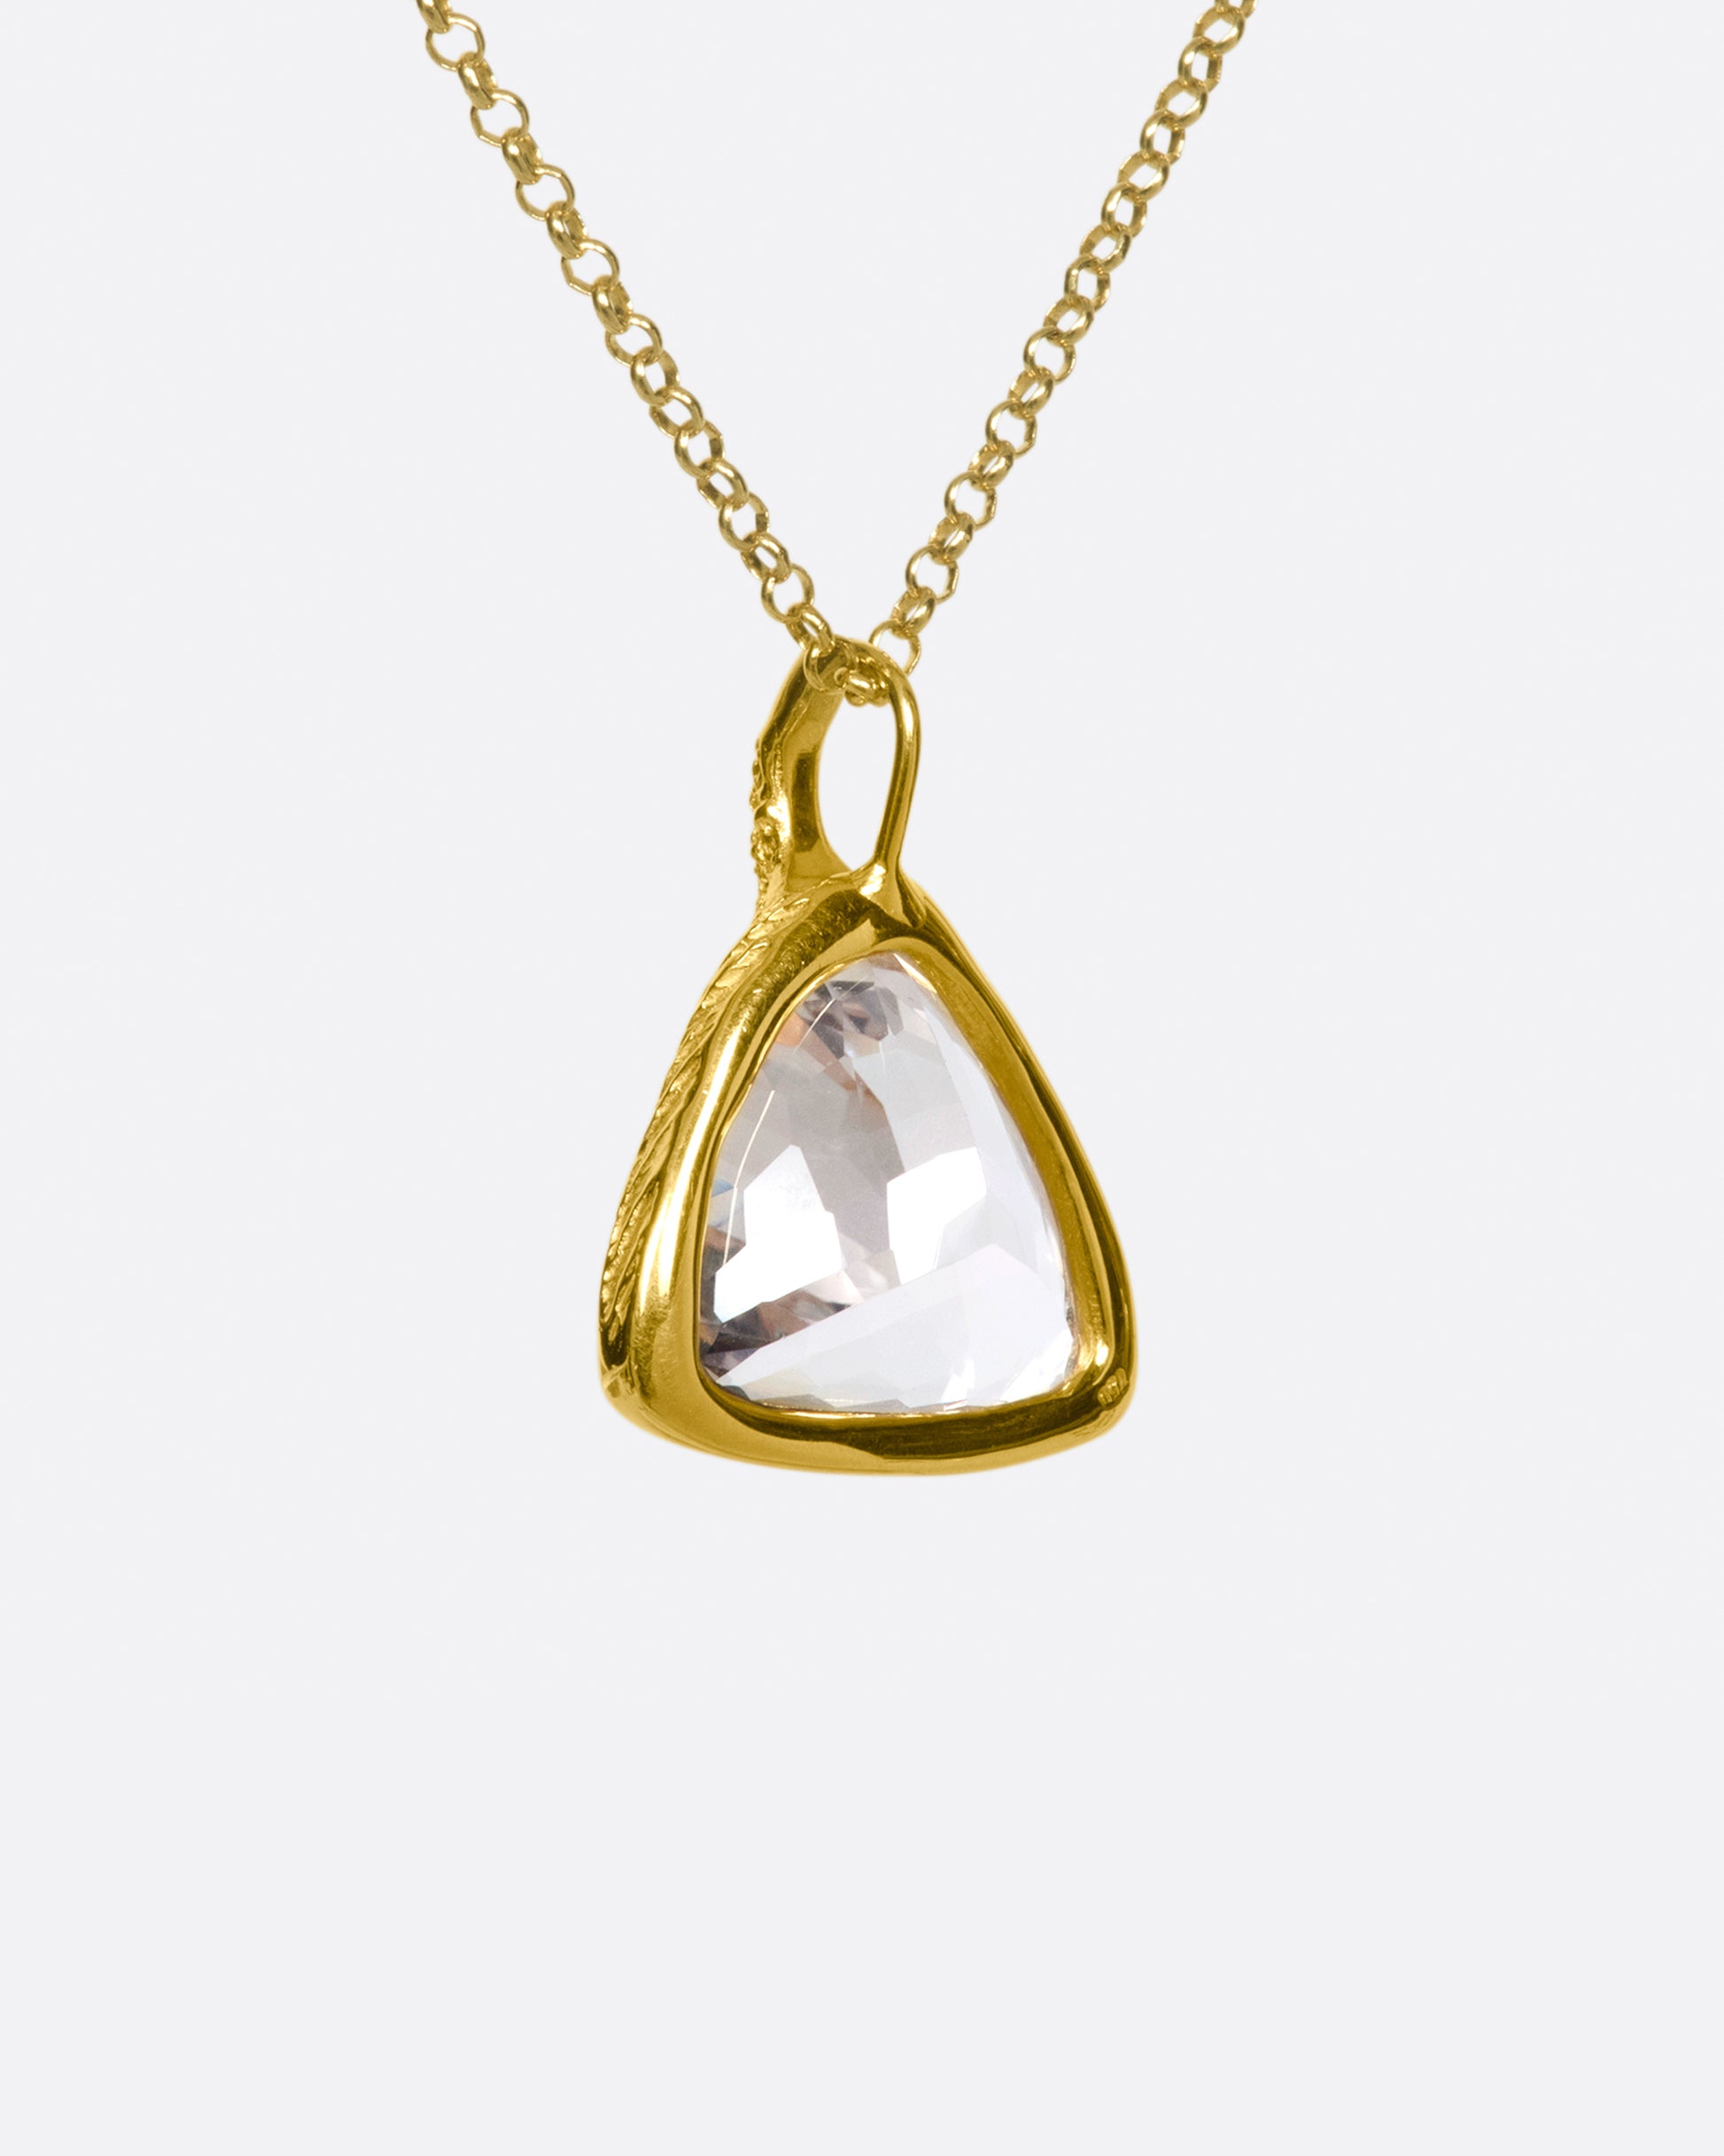 This stone pendant is nothing short of spectacular, but the added diamond accents around the setting don't hurt.